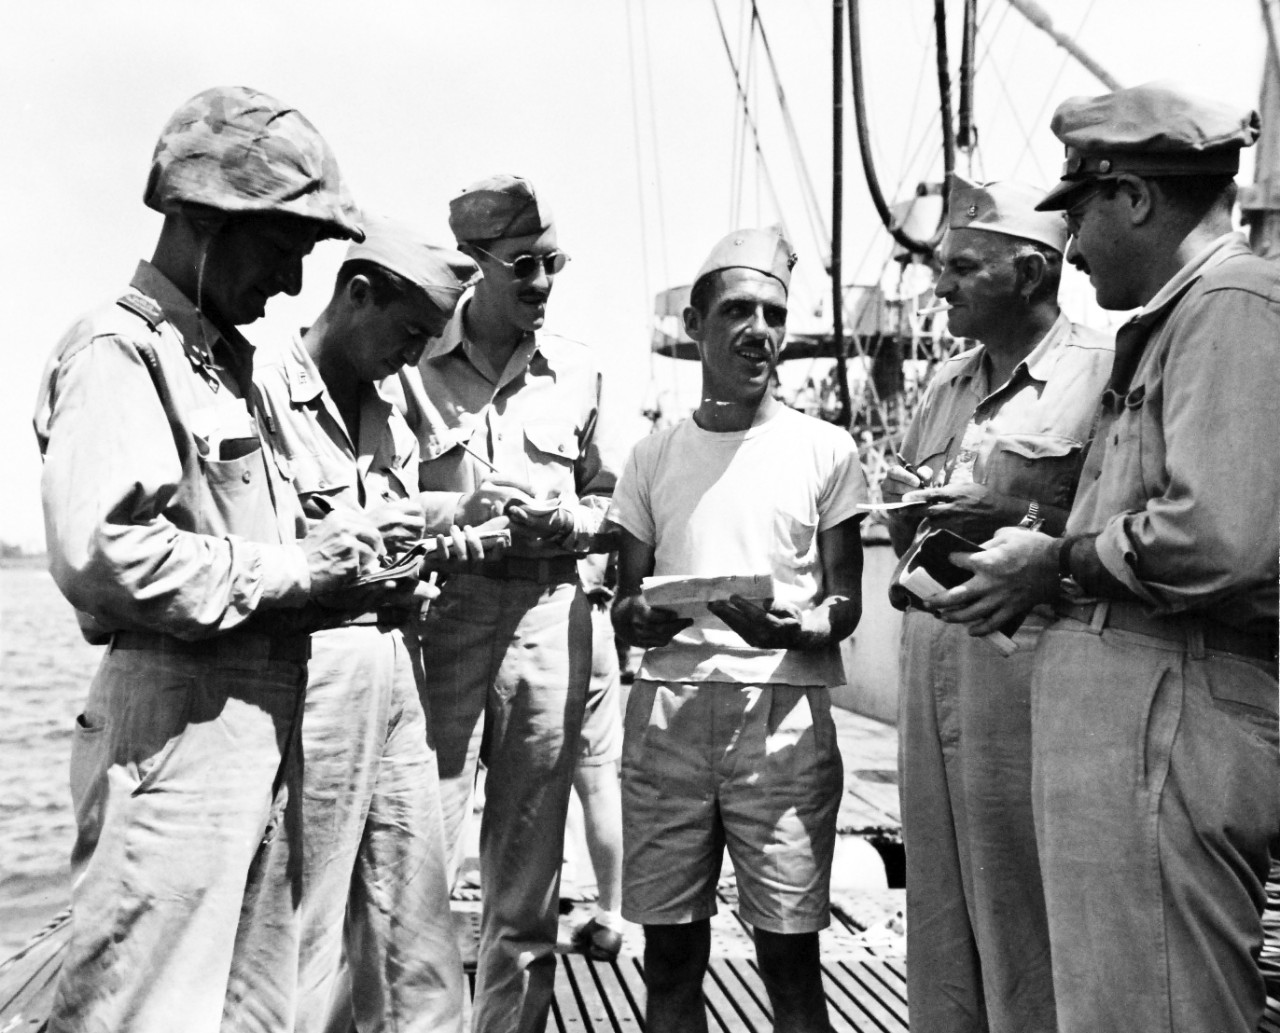 80-G-307703:  Invasion of Saipan, June-July 1944.   USS Cavalla (SS-244) during invasion operations.  The Captain, Lieutenant Commander Herman J. Kossler, USN, is being interviewed, June 1944.  Received March 20, 1945.      Official U.S. Navy Photograph, now in the collections of the U.S. Navy.  (2017/04/11).  